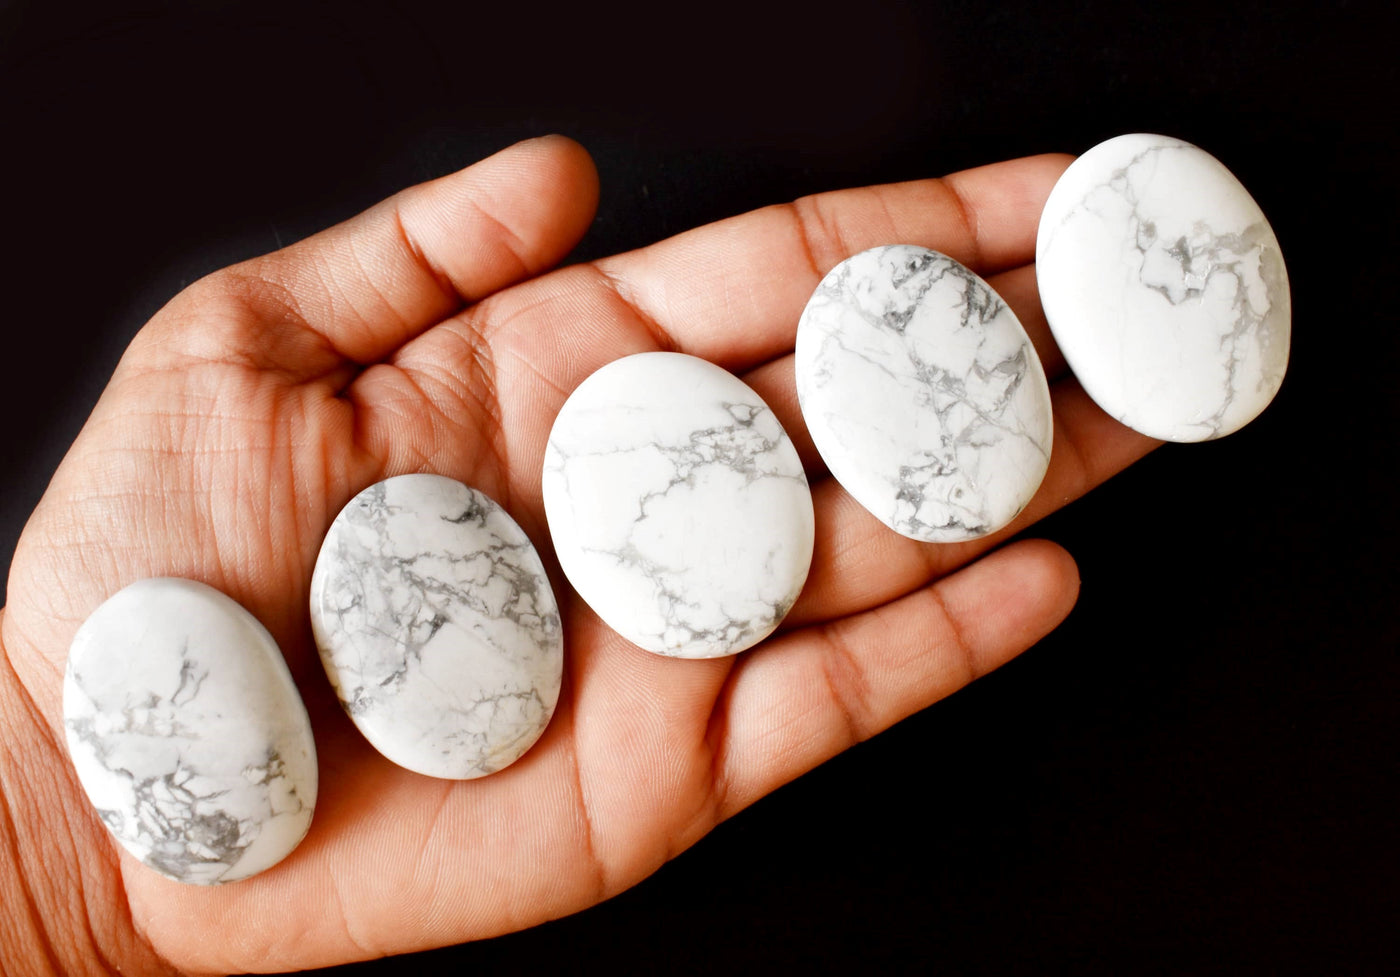 Howlite Pocket Stones (Inspiration and Truth)